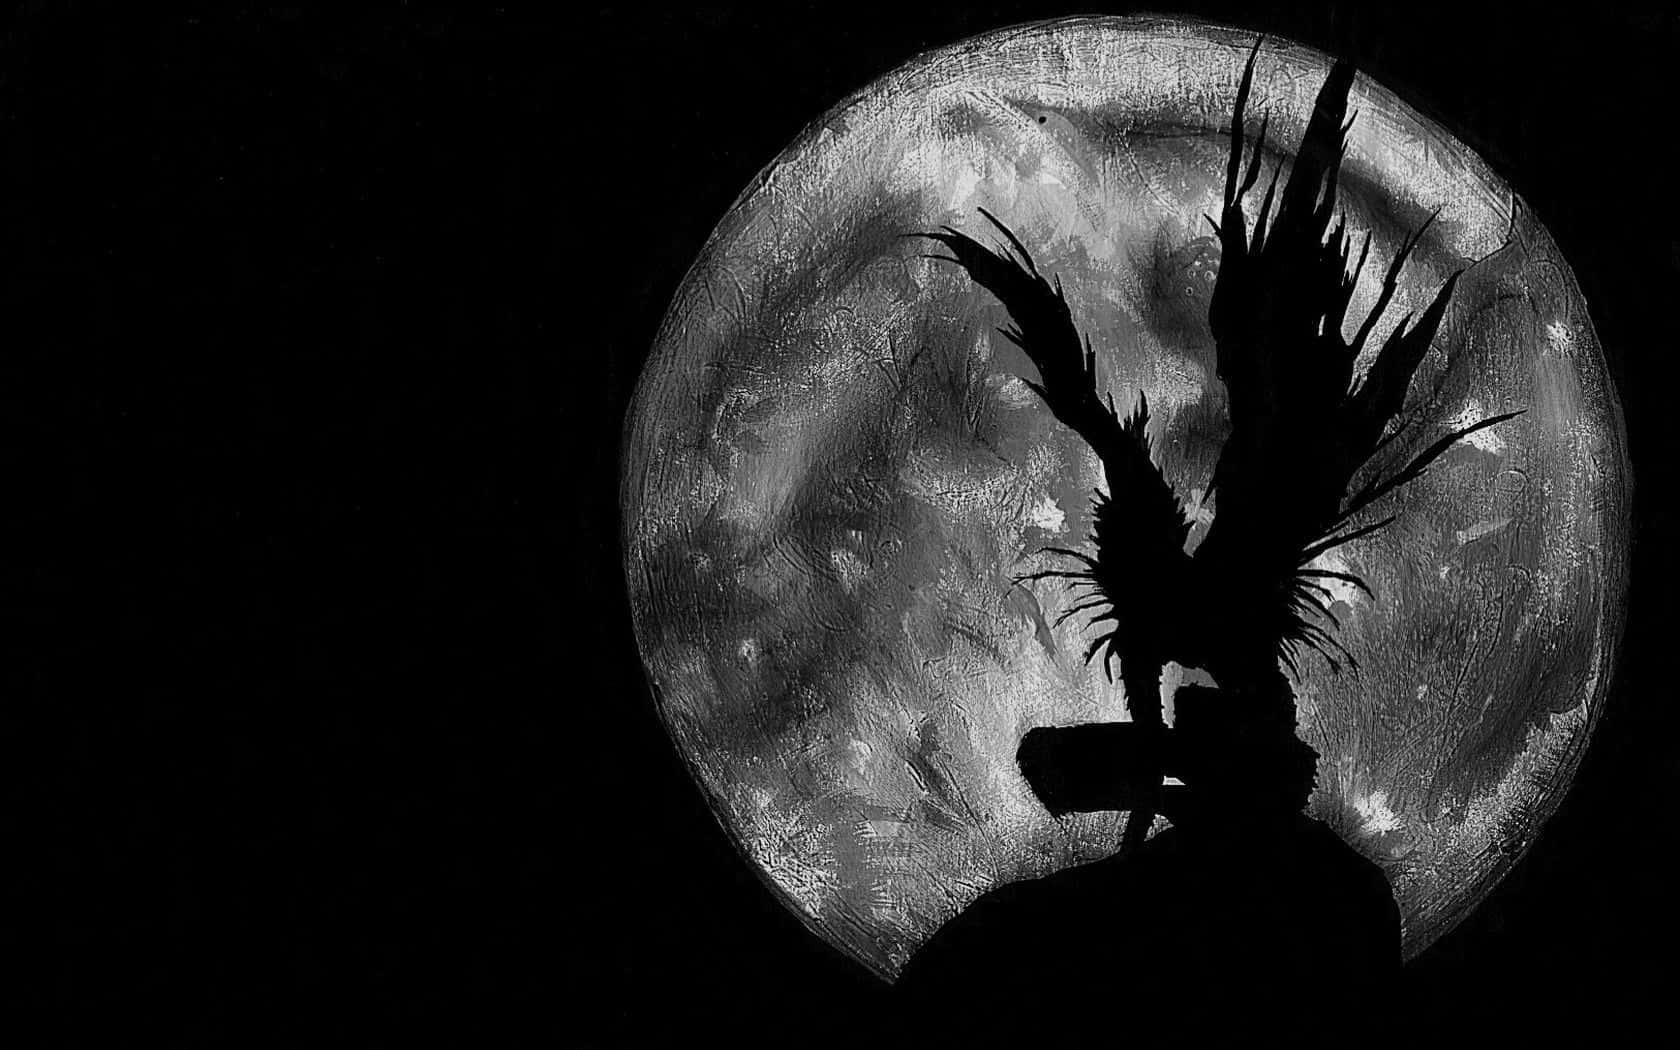 Free Shinigami Wallpaper Downloads, [100+] Shinigami Wallpapers for FREE |  